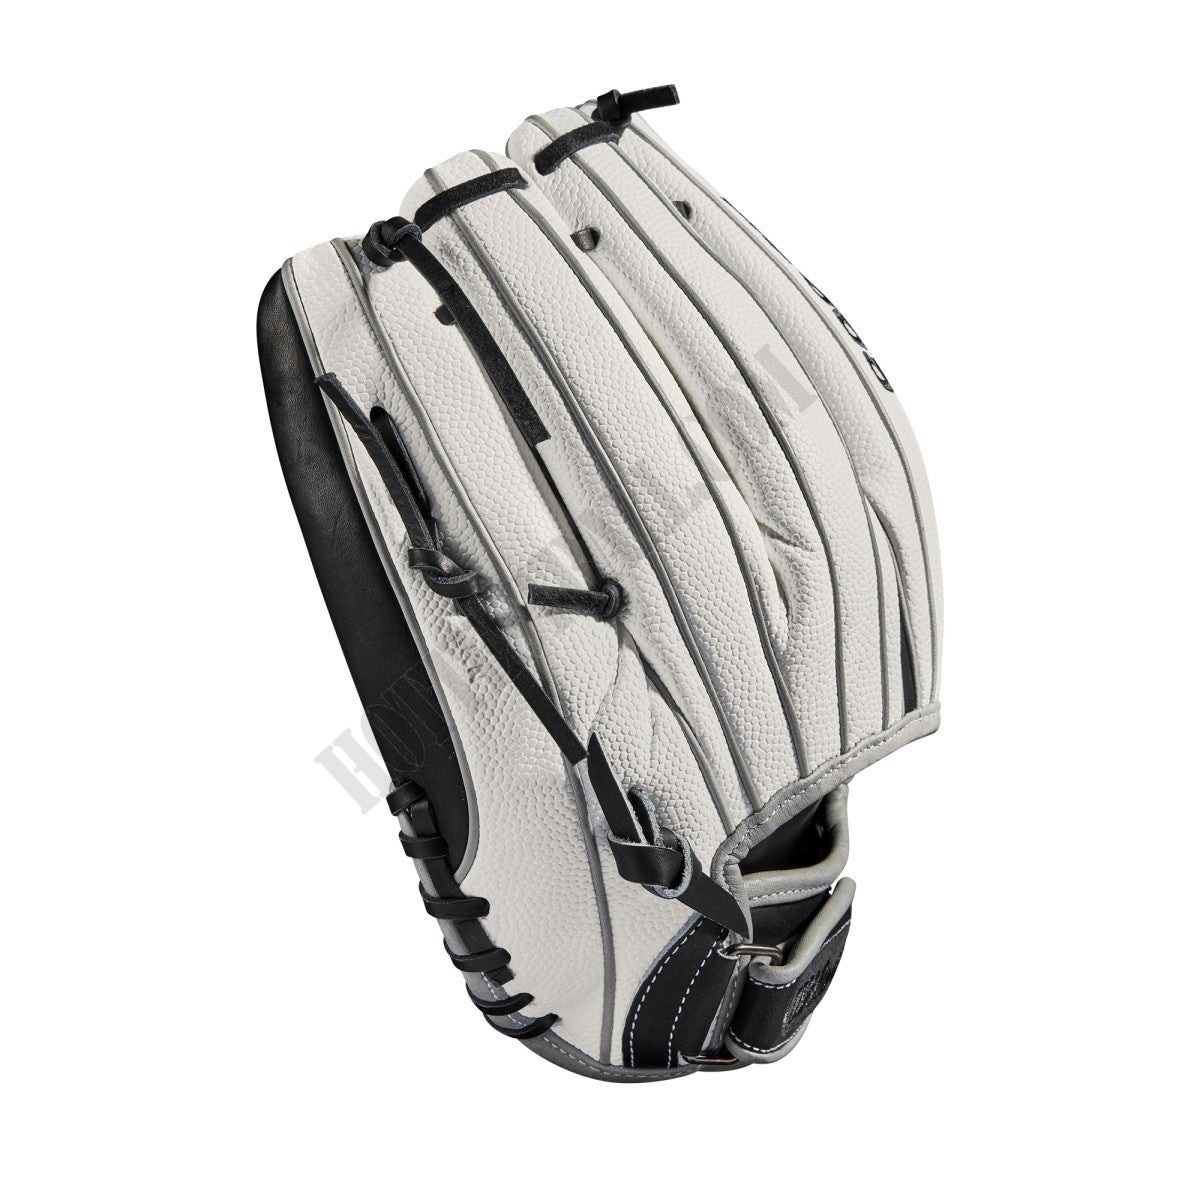 2019 A2000 FP12 SuperSkin 12" Infield Fastpitch Glove - Right Hand Throw ● Wilson Promotions - -4